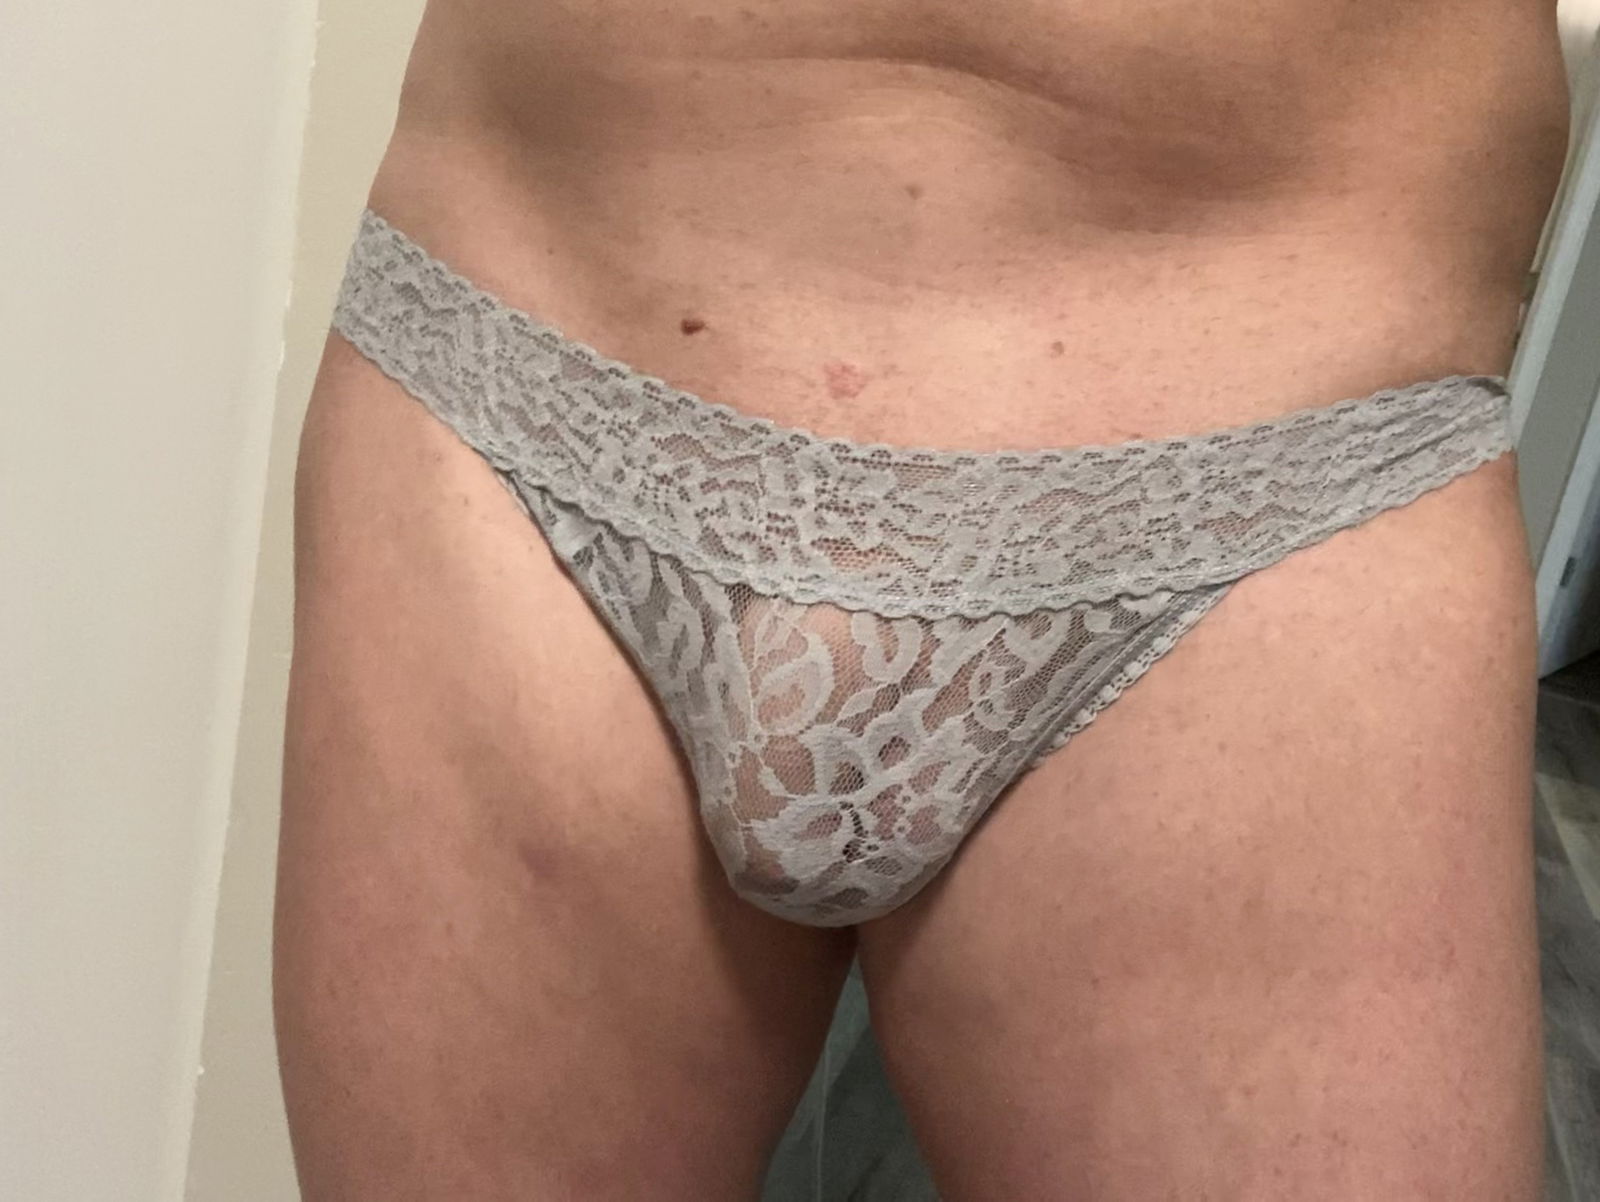 Photo by Ginger with the username @Gingernylons,  September 27, 2022 at 5:30 AM. The post is about the topic Panties fetish and the text says 'im back and horny as ever with some new pics'